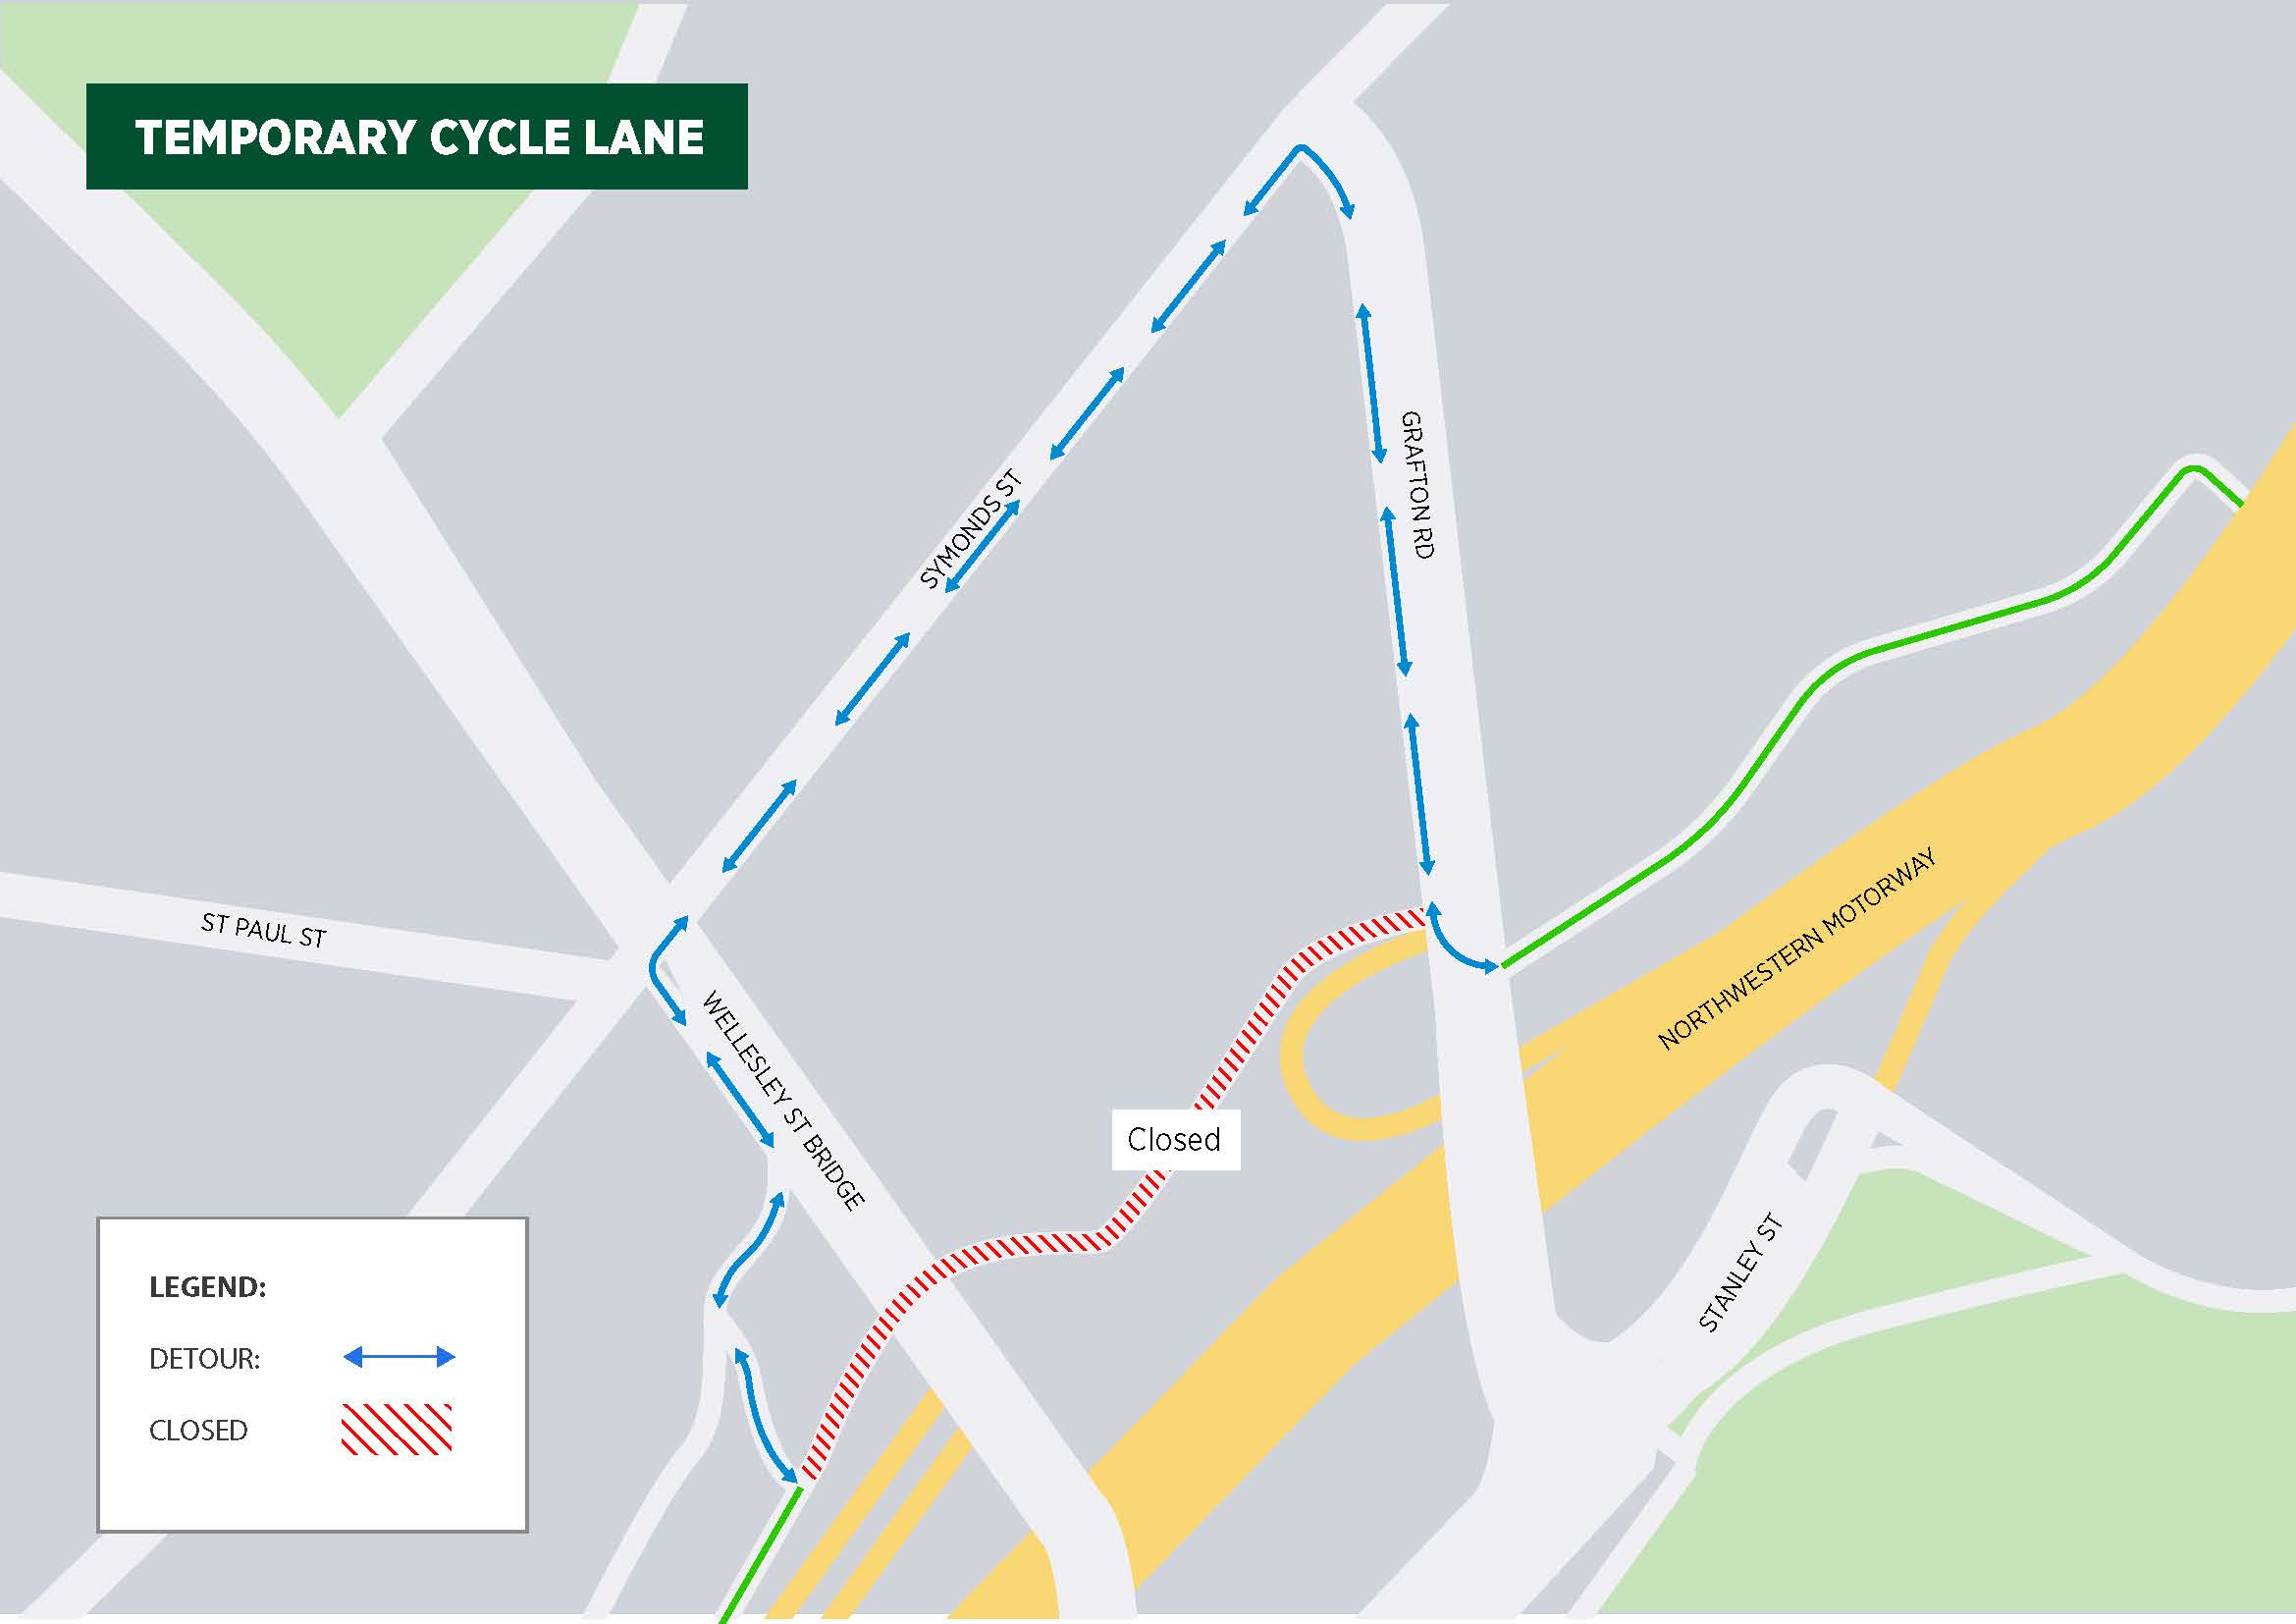 Grafton Gulley cycleway update - temporary route change